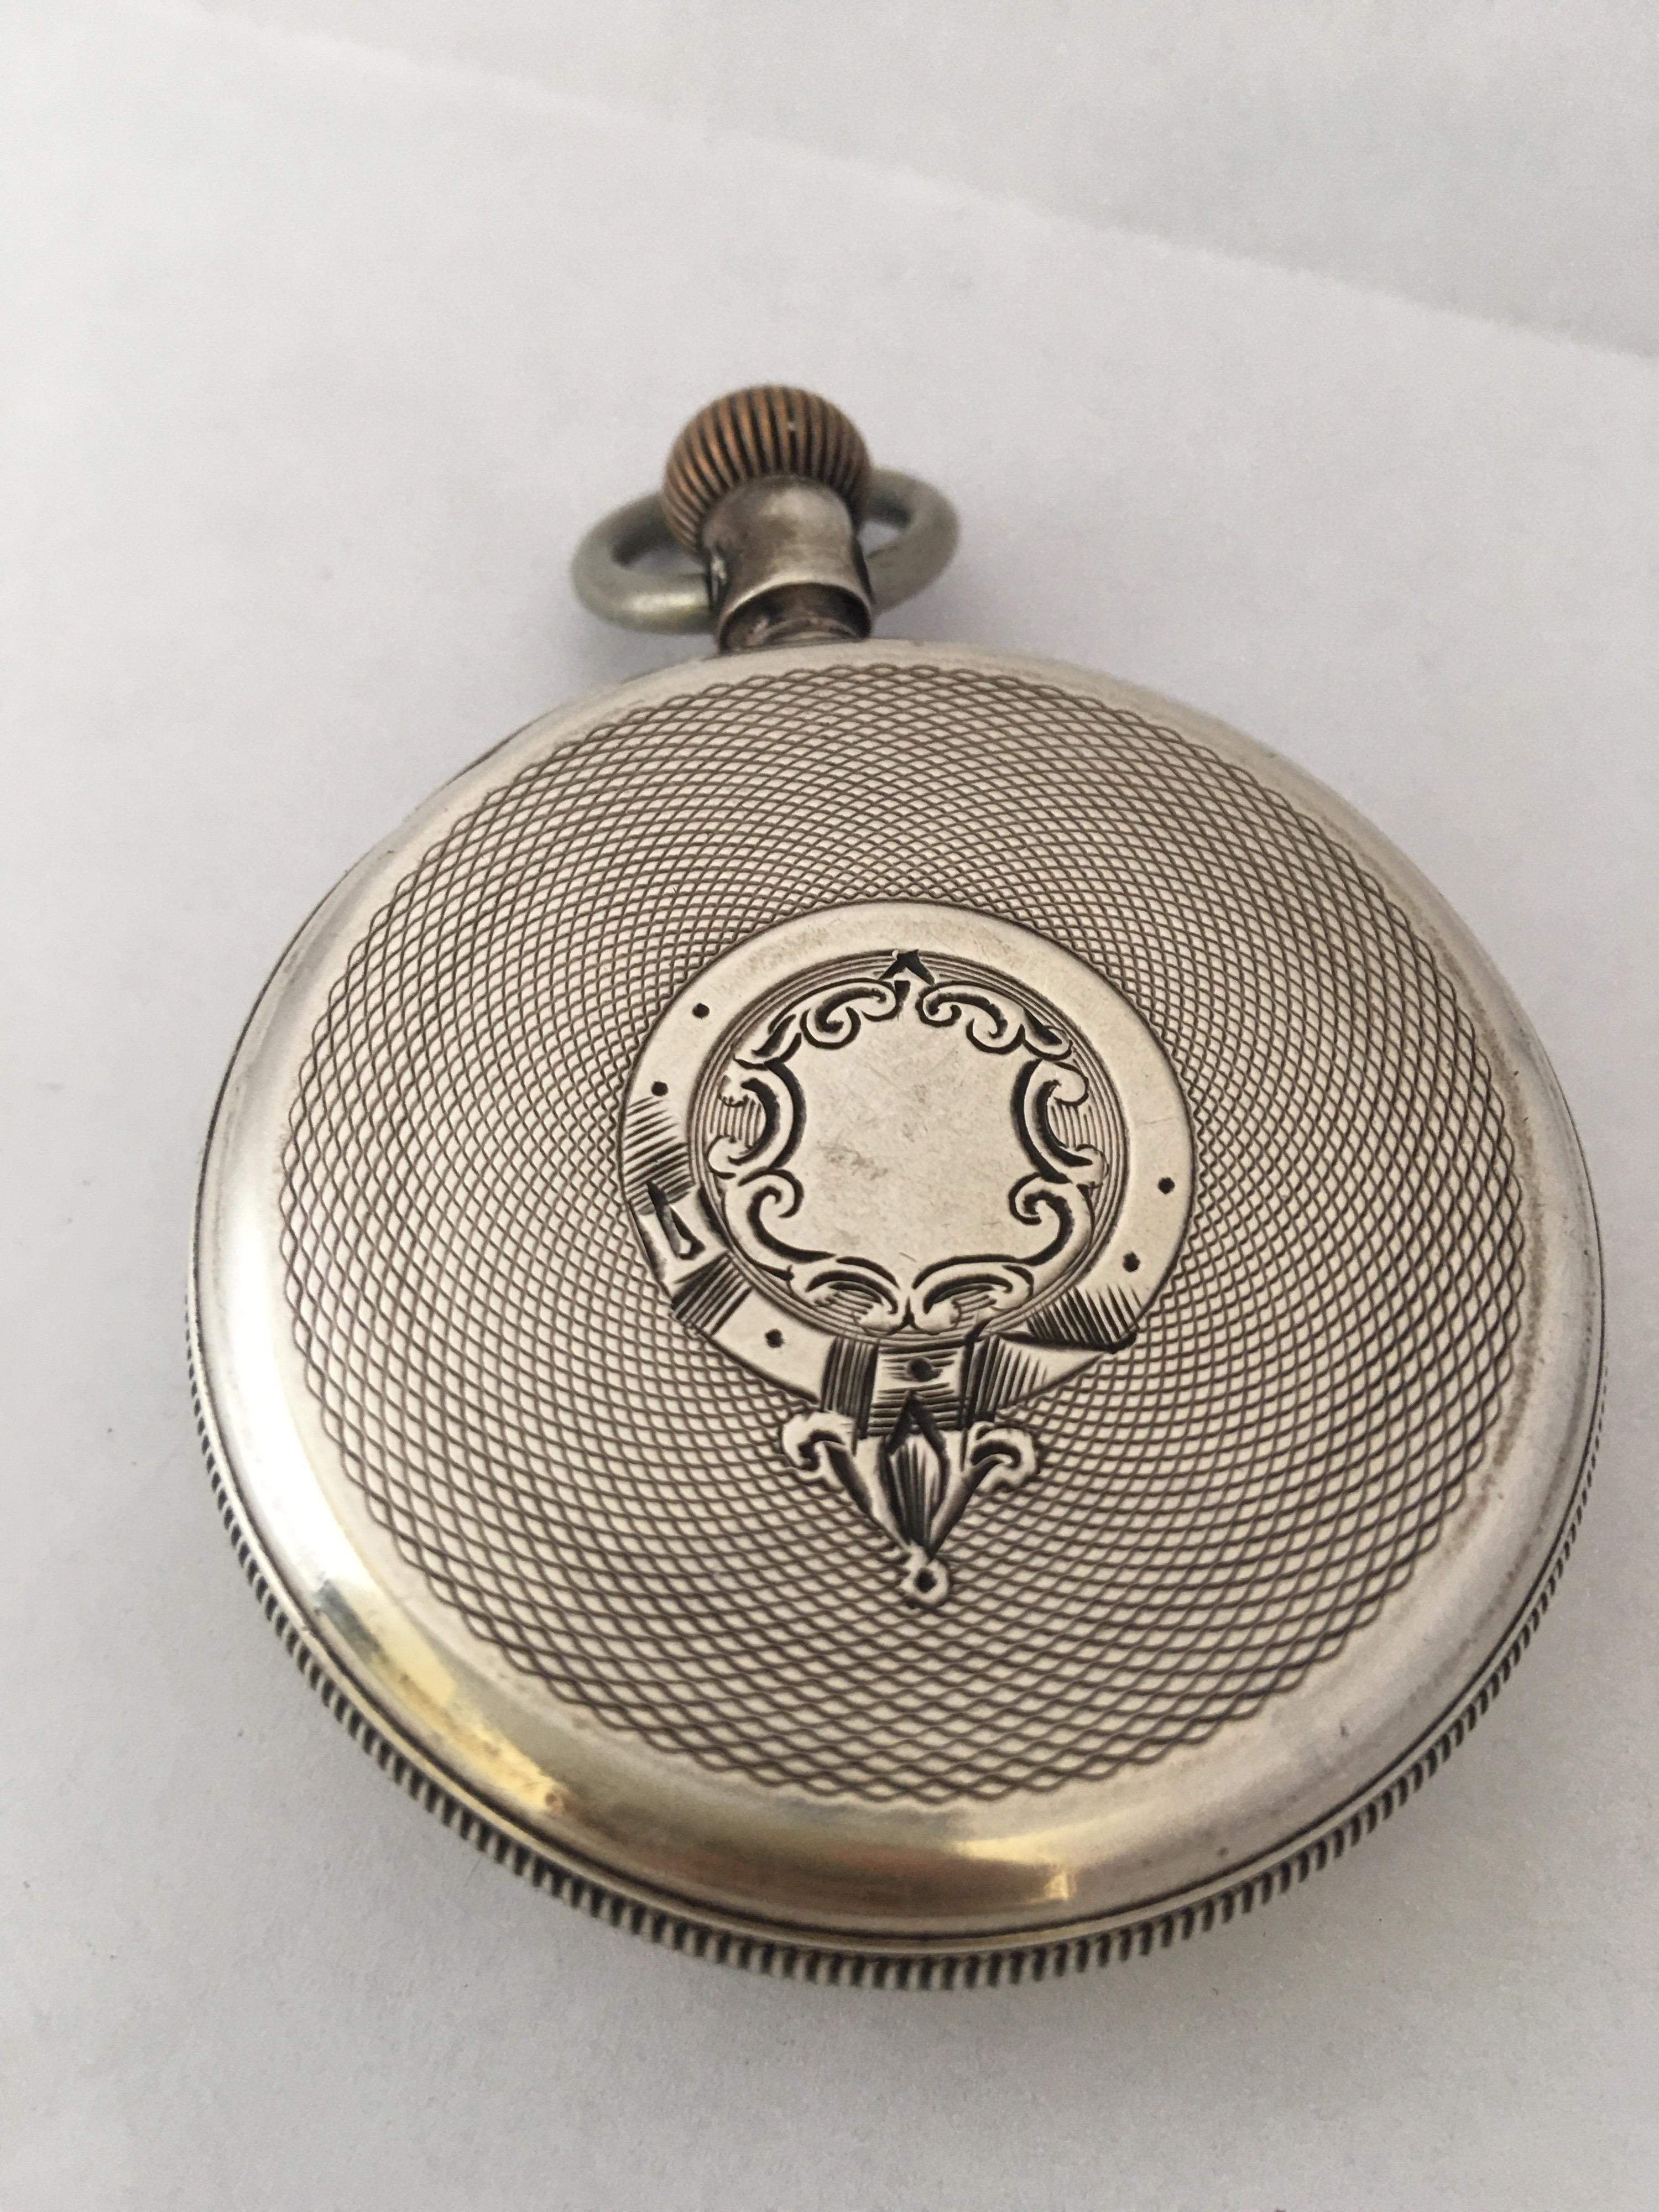 This beautiful 52mm diameter antique silver hand-winding(keyless) pocket watch is in good working condition and it runs well. Visible signs of ageing and used with small and light surface marks on the glass and on the watch case as shown. 

Please